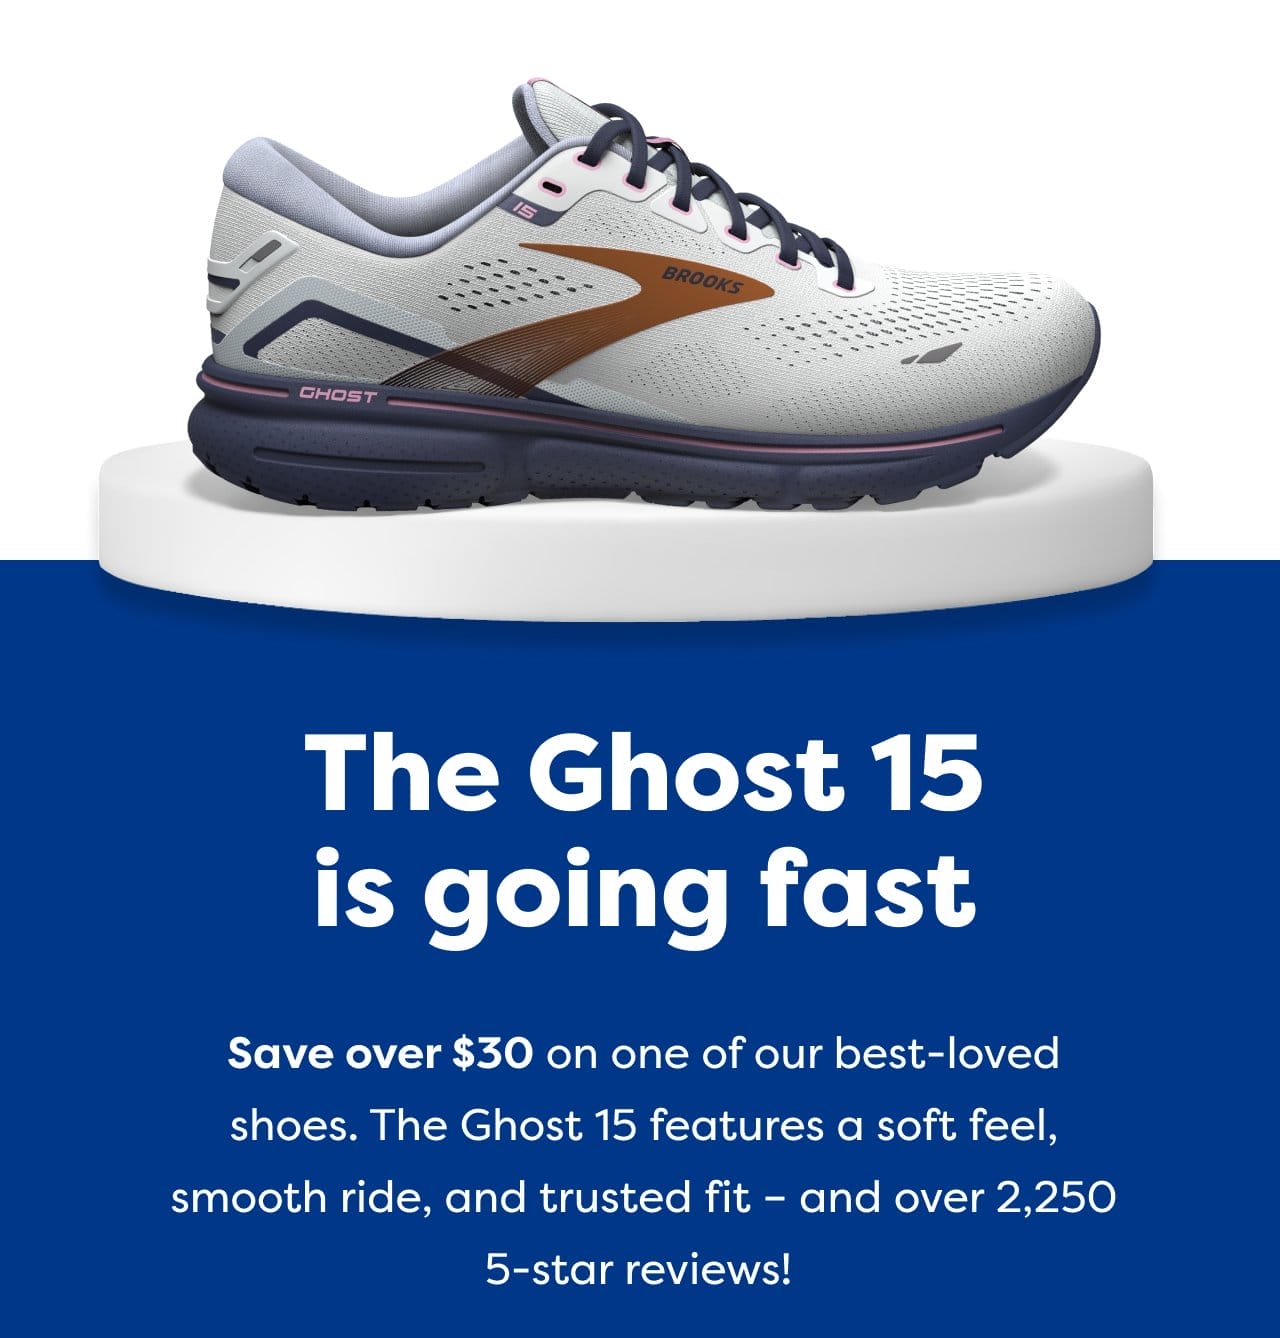 The Ghost 15 is going fast. Save over \\$30 on one of our best-loved shoes. The Ghost 15 features a soft feel, smooth ride, and trusted fit - and over 2,250 5-star reviews!